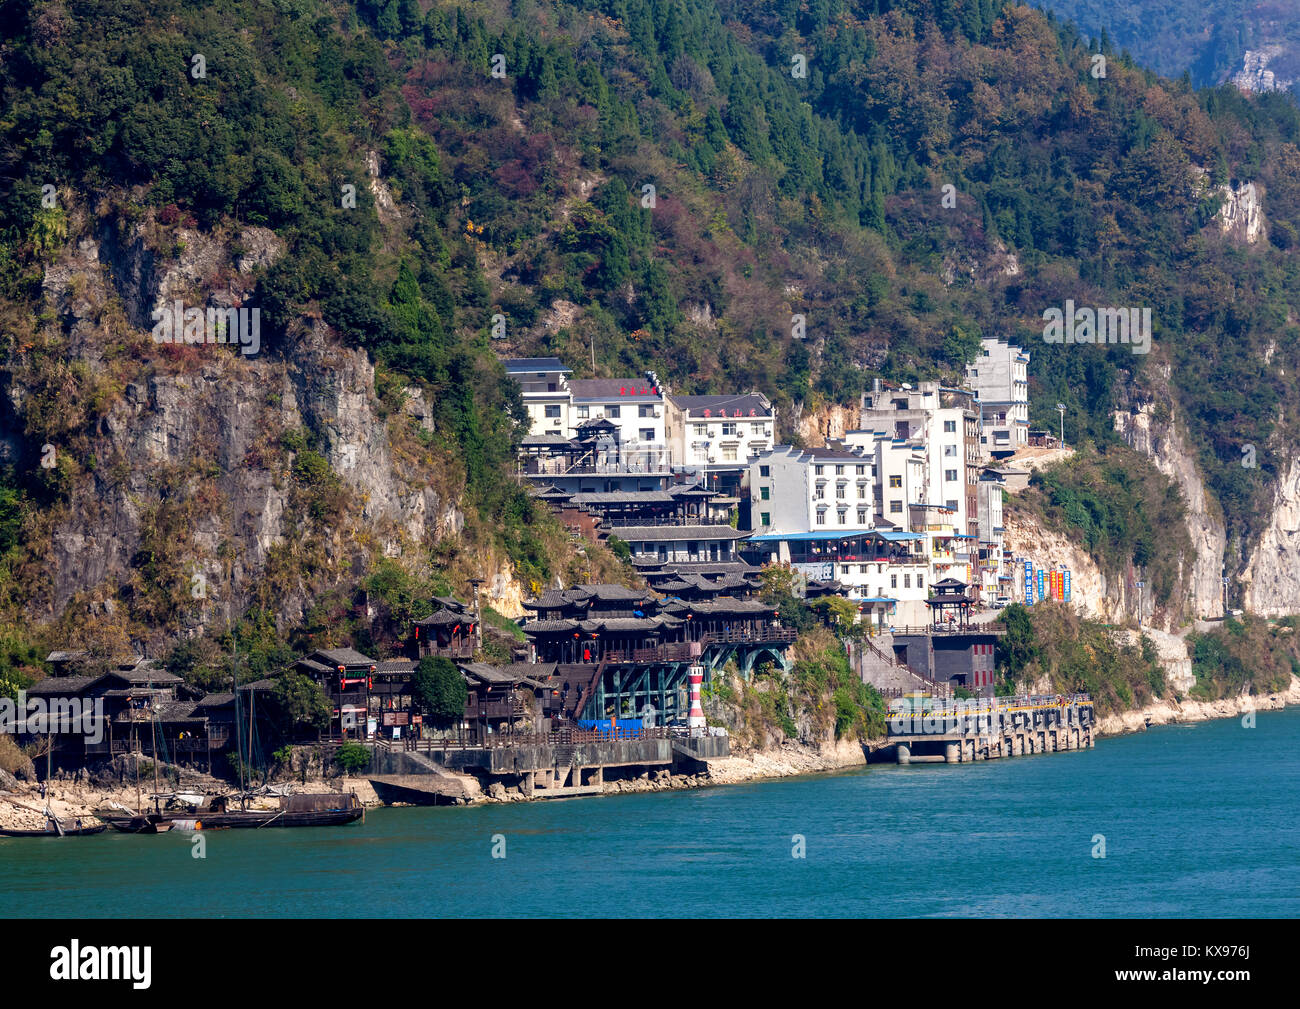 New buildings alongside the old following flooding of Yangtze River after construction of Three Gorges Dam Stock Photo